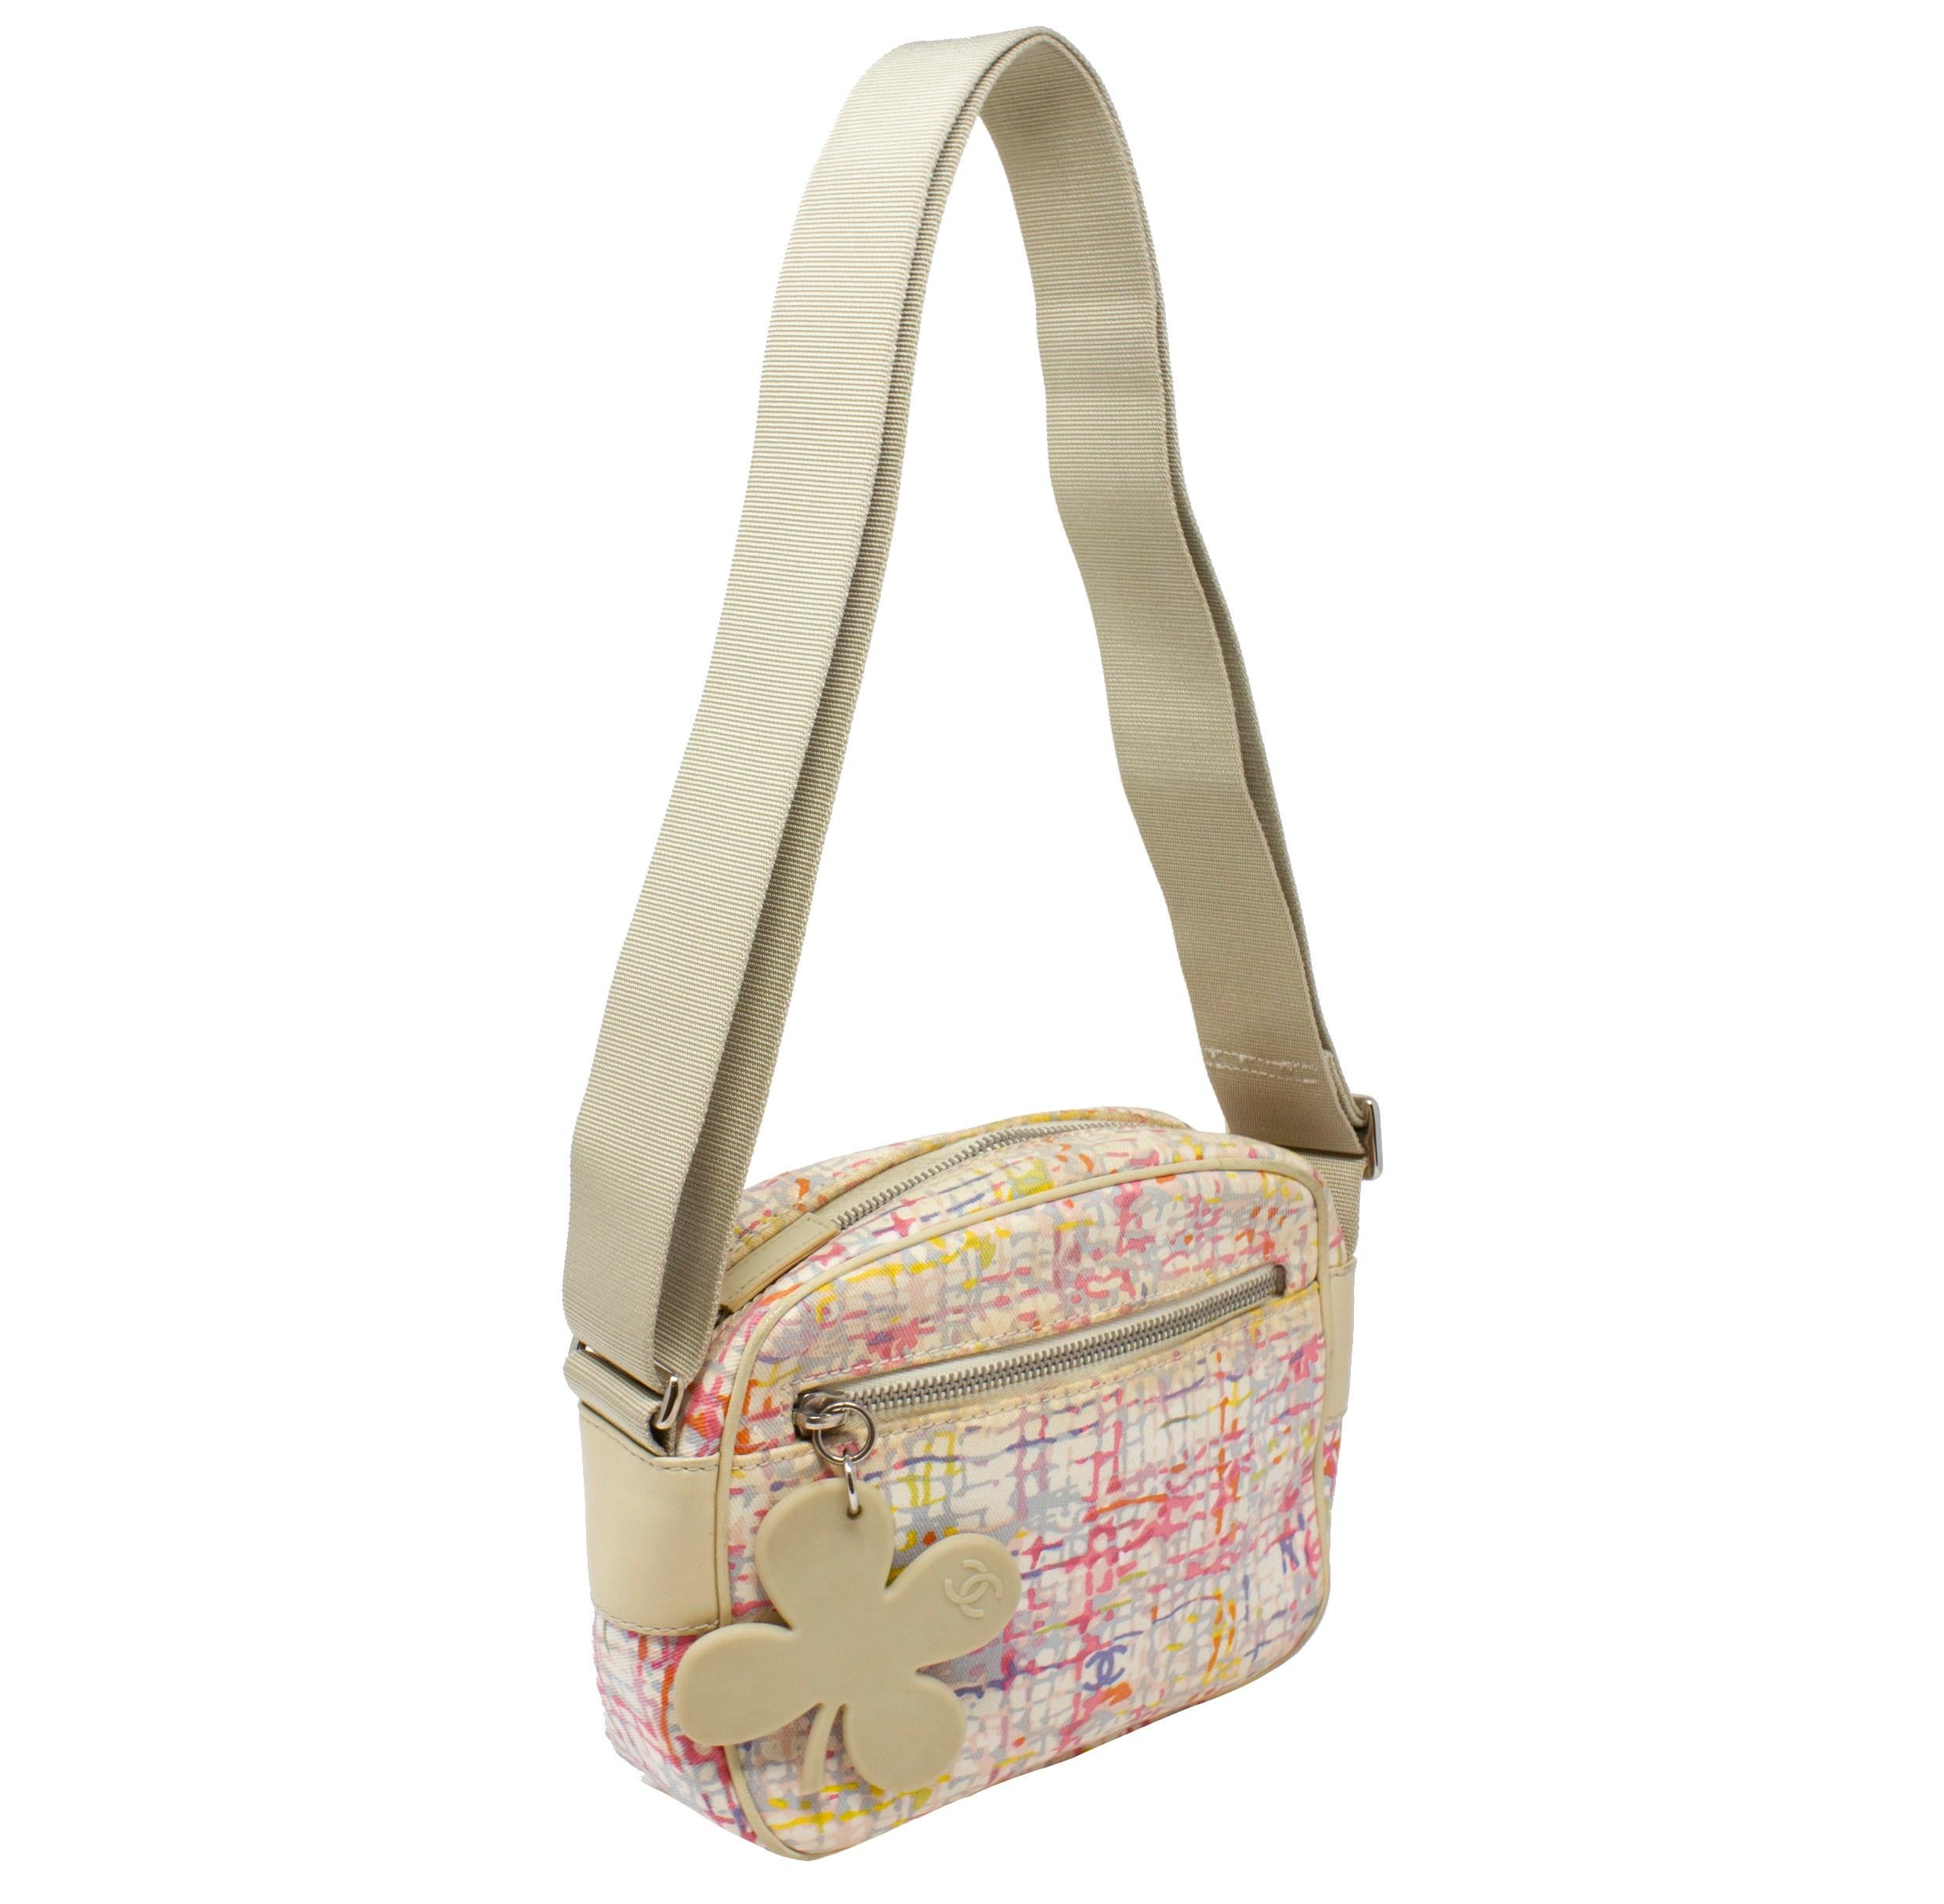 From the 2004-2005 Lucky Clover Collection! We love the adjustable shoulder strap because you can make it a shoulder bag or a crossbody. The size is amazing because it will fit your essentials but not be bulky. Cute is an understatement!!! Rendered